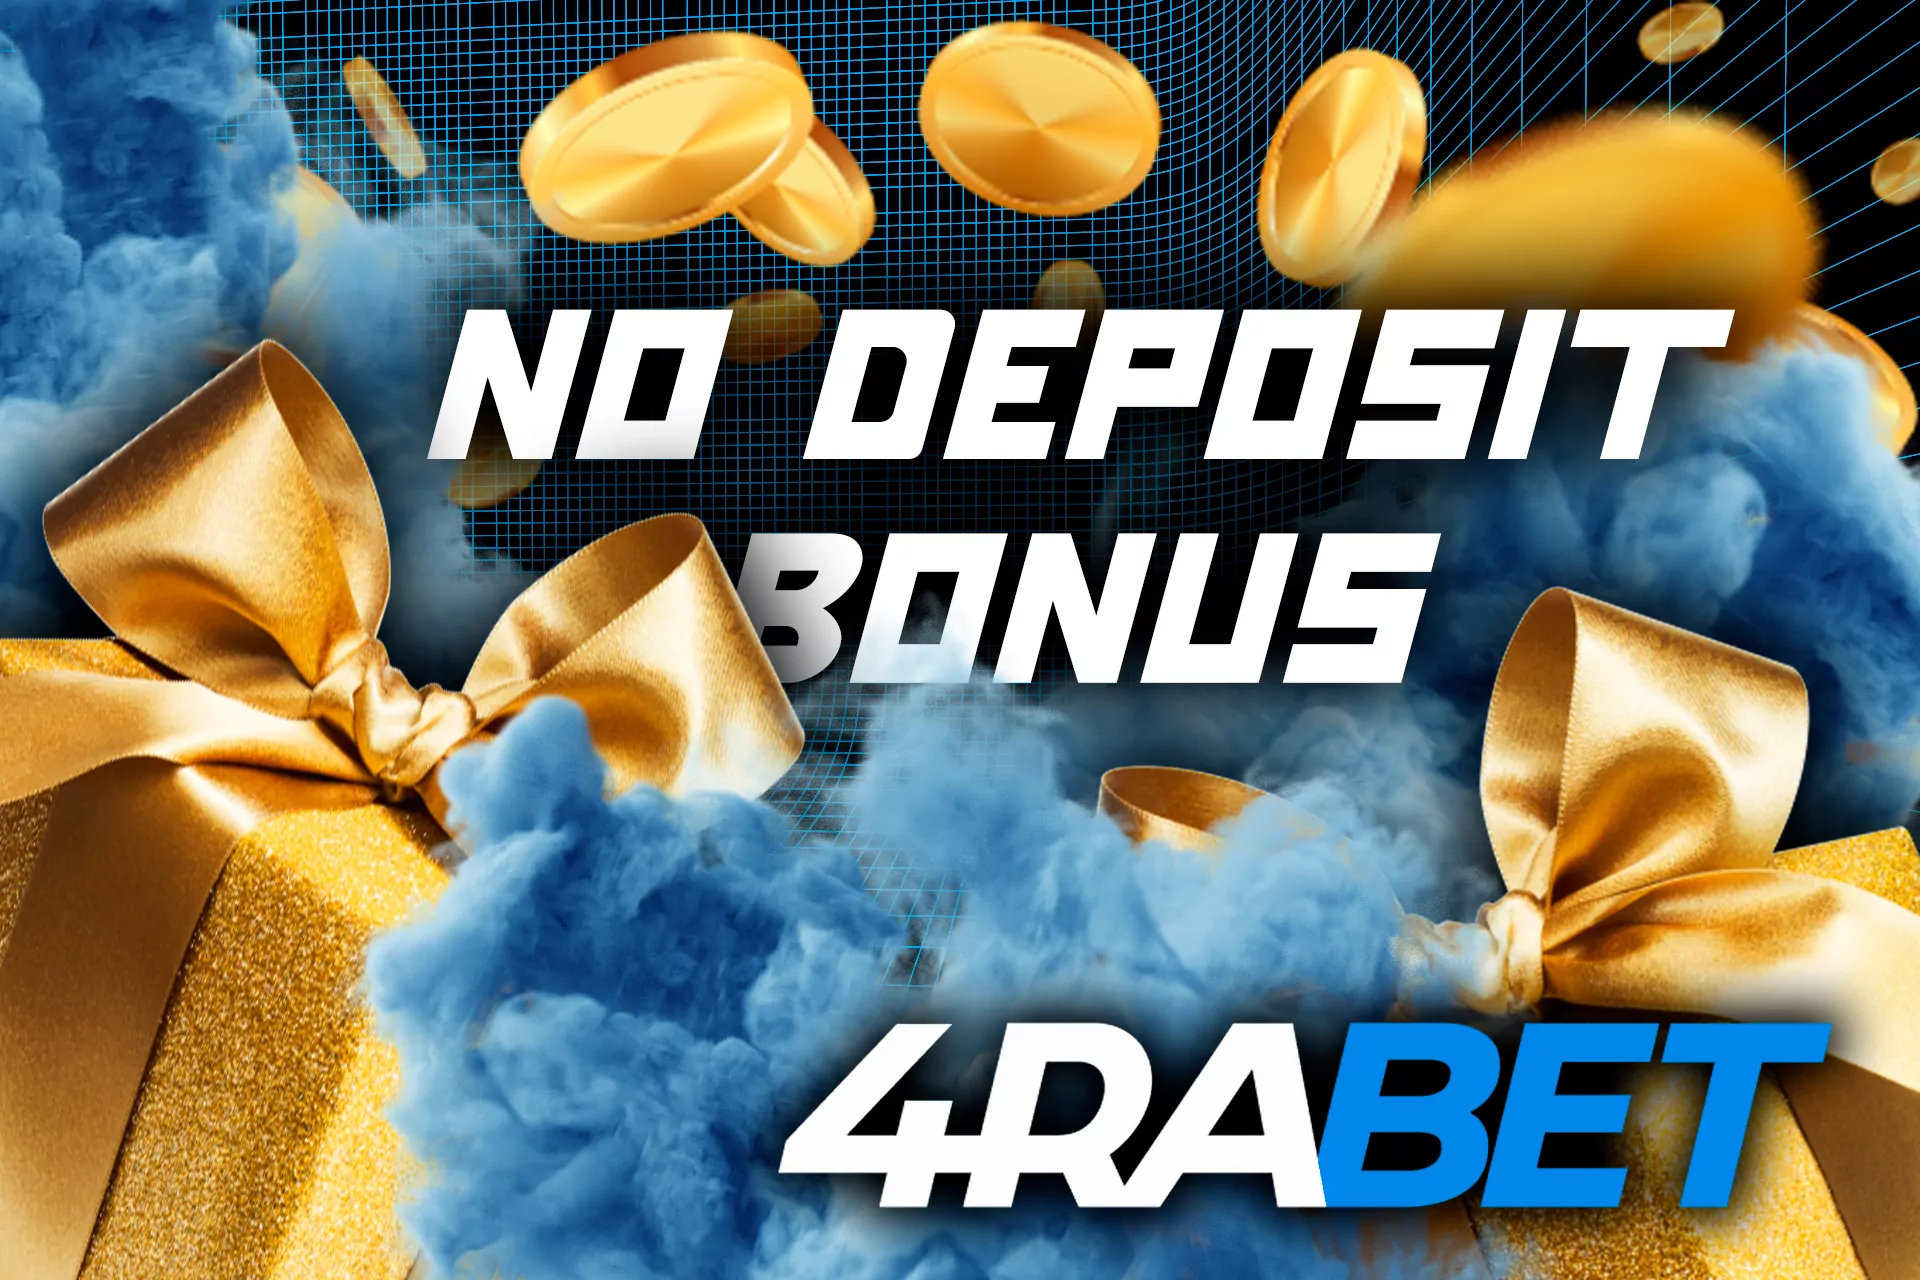 The no deposit bonus gives you the possibility to get some free spins, free bets or cashback.